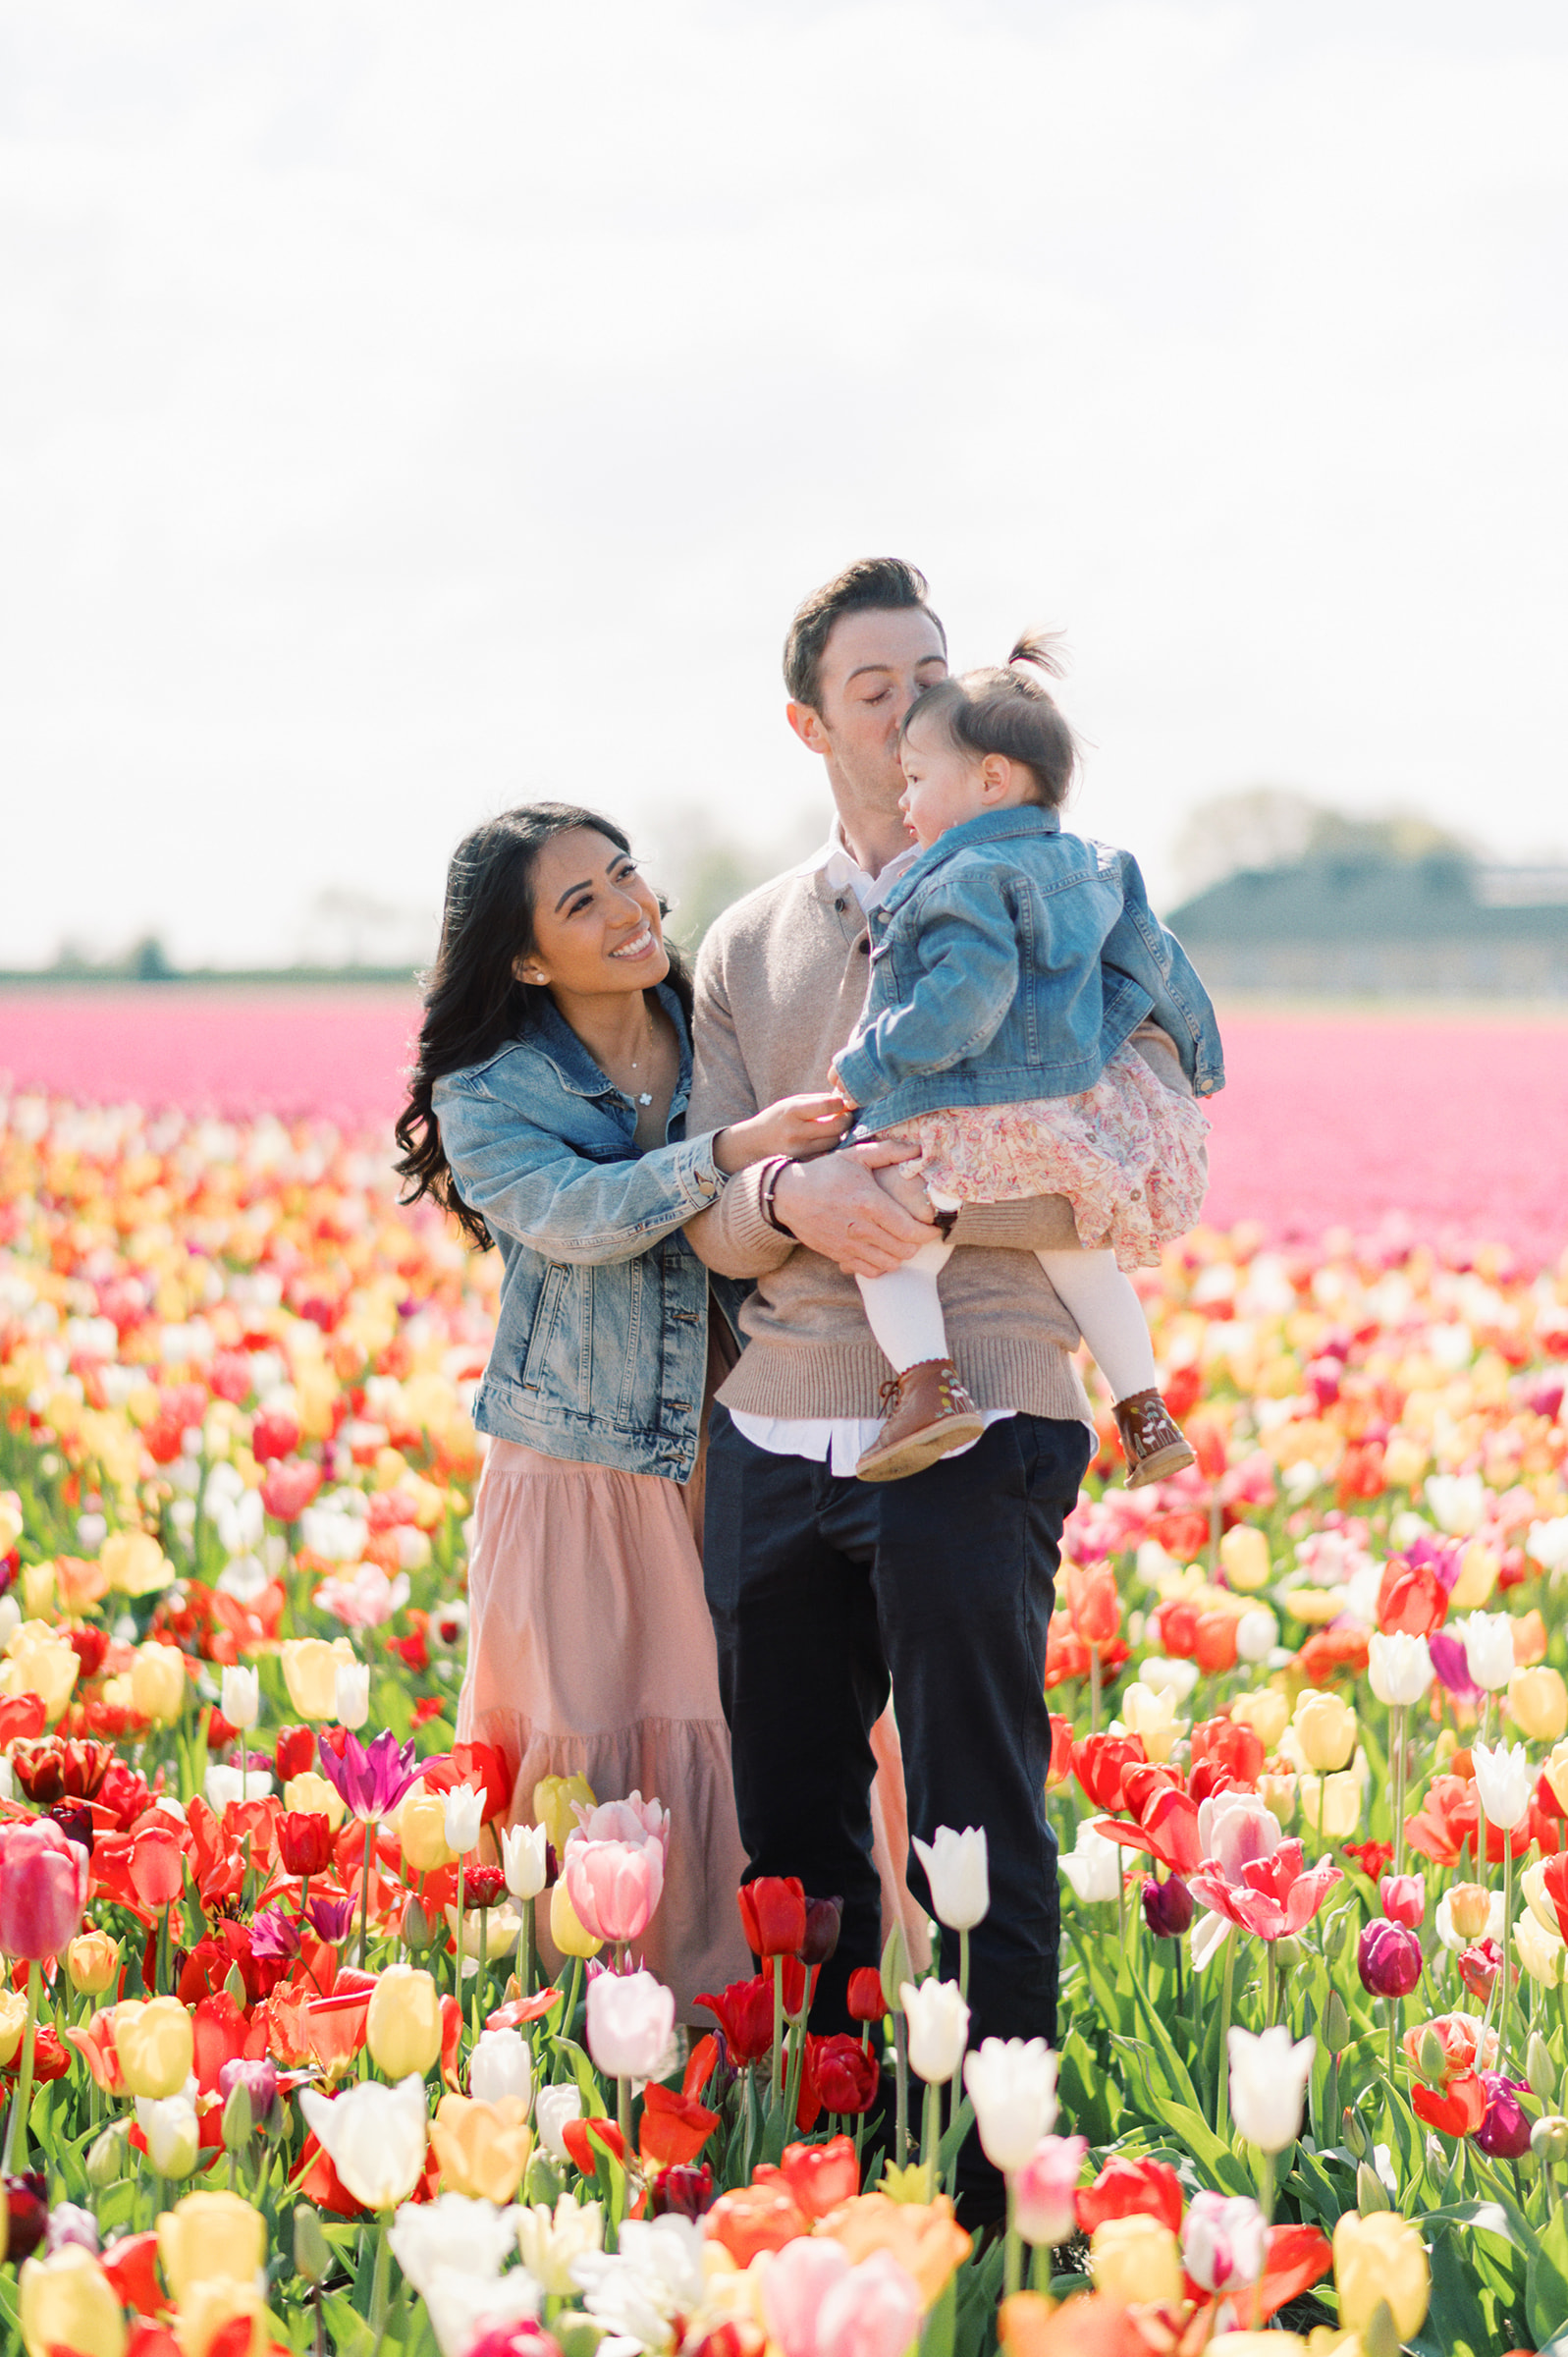 A family in the tulip fields in the Netherlands